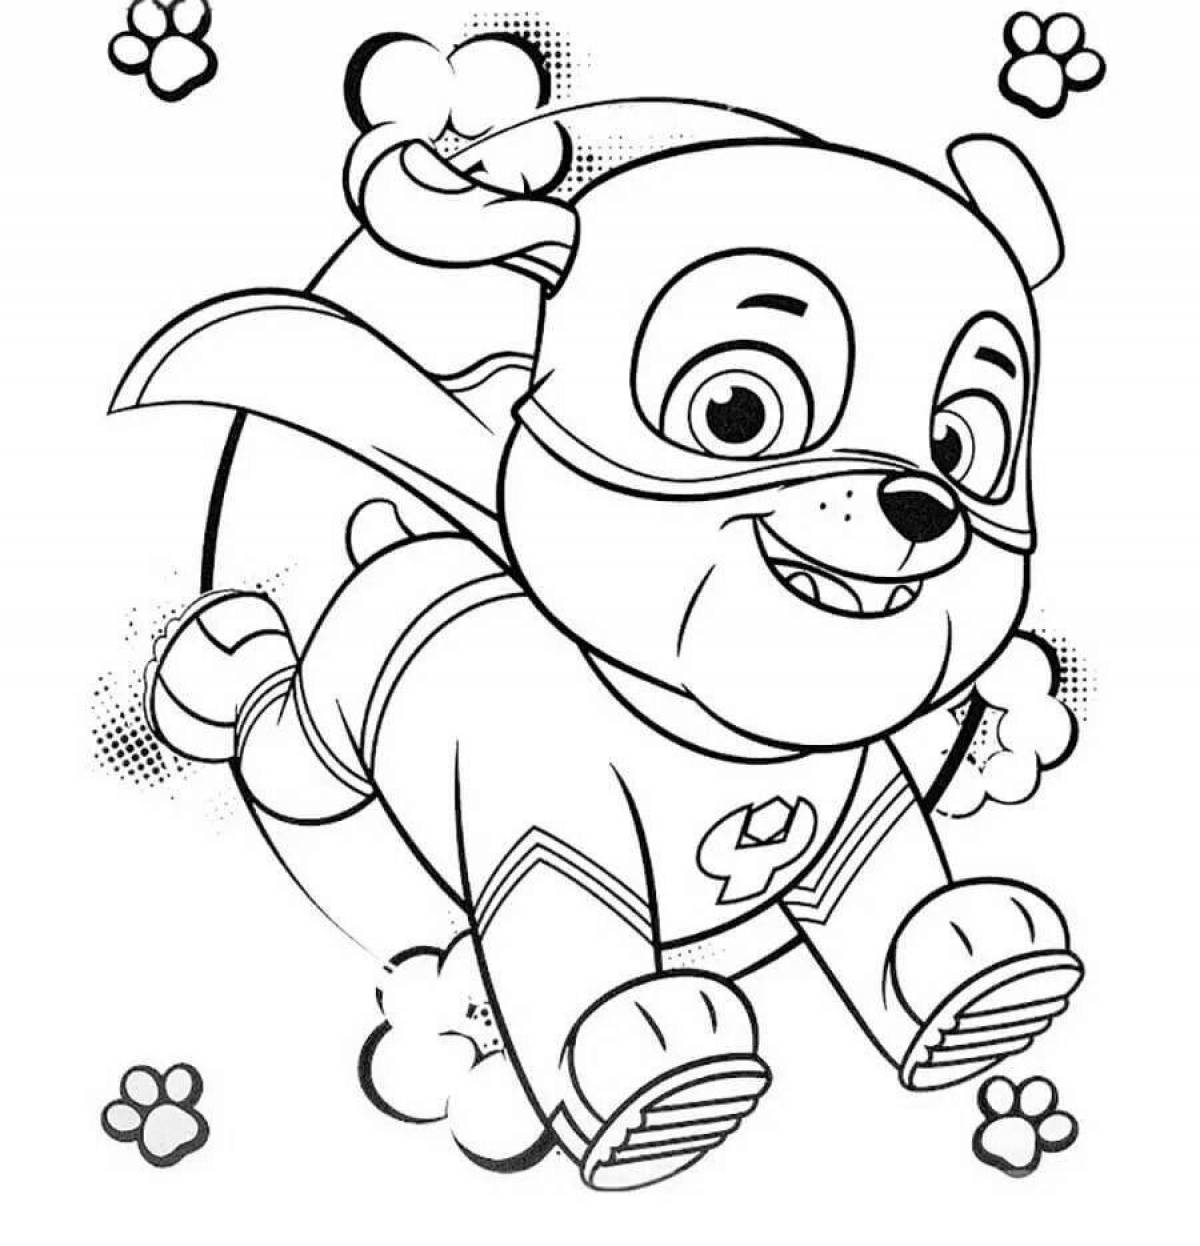 Super bear awesome coloring book